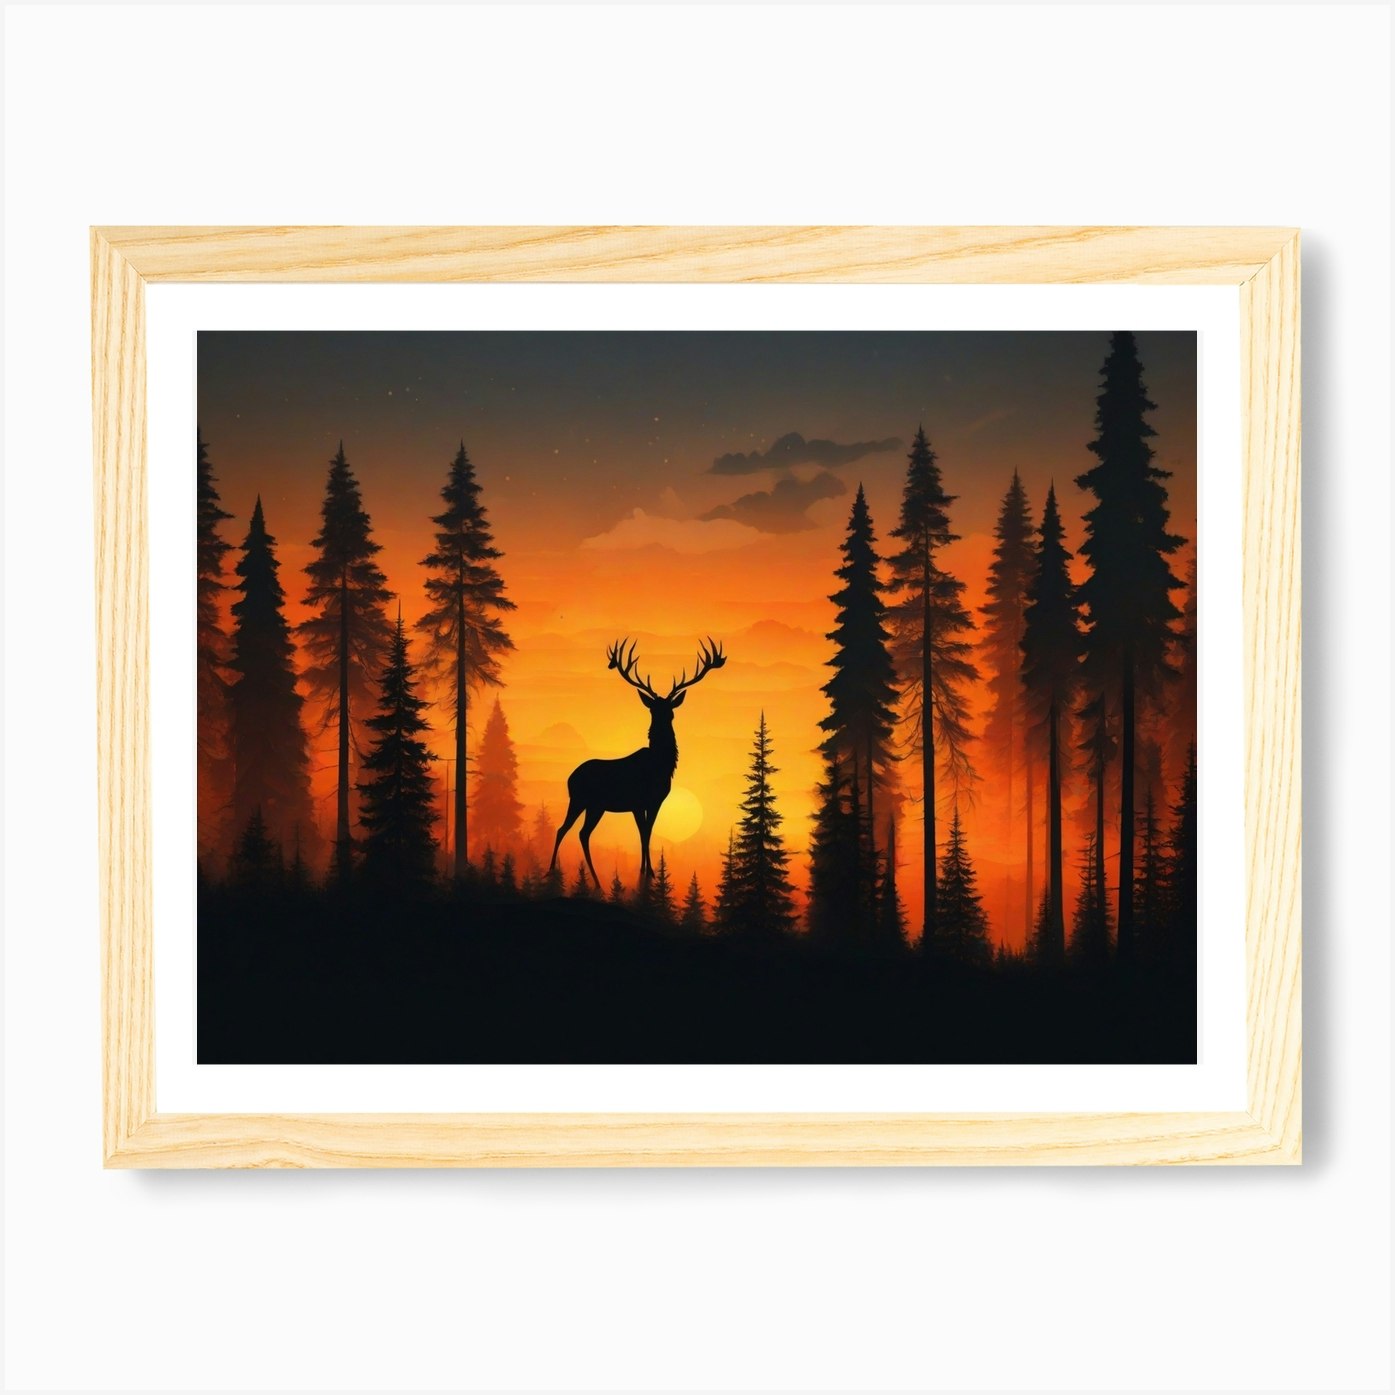 Deer Silhouette in Sunset Painting